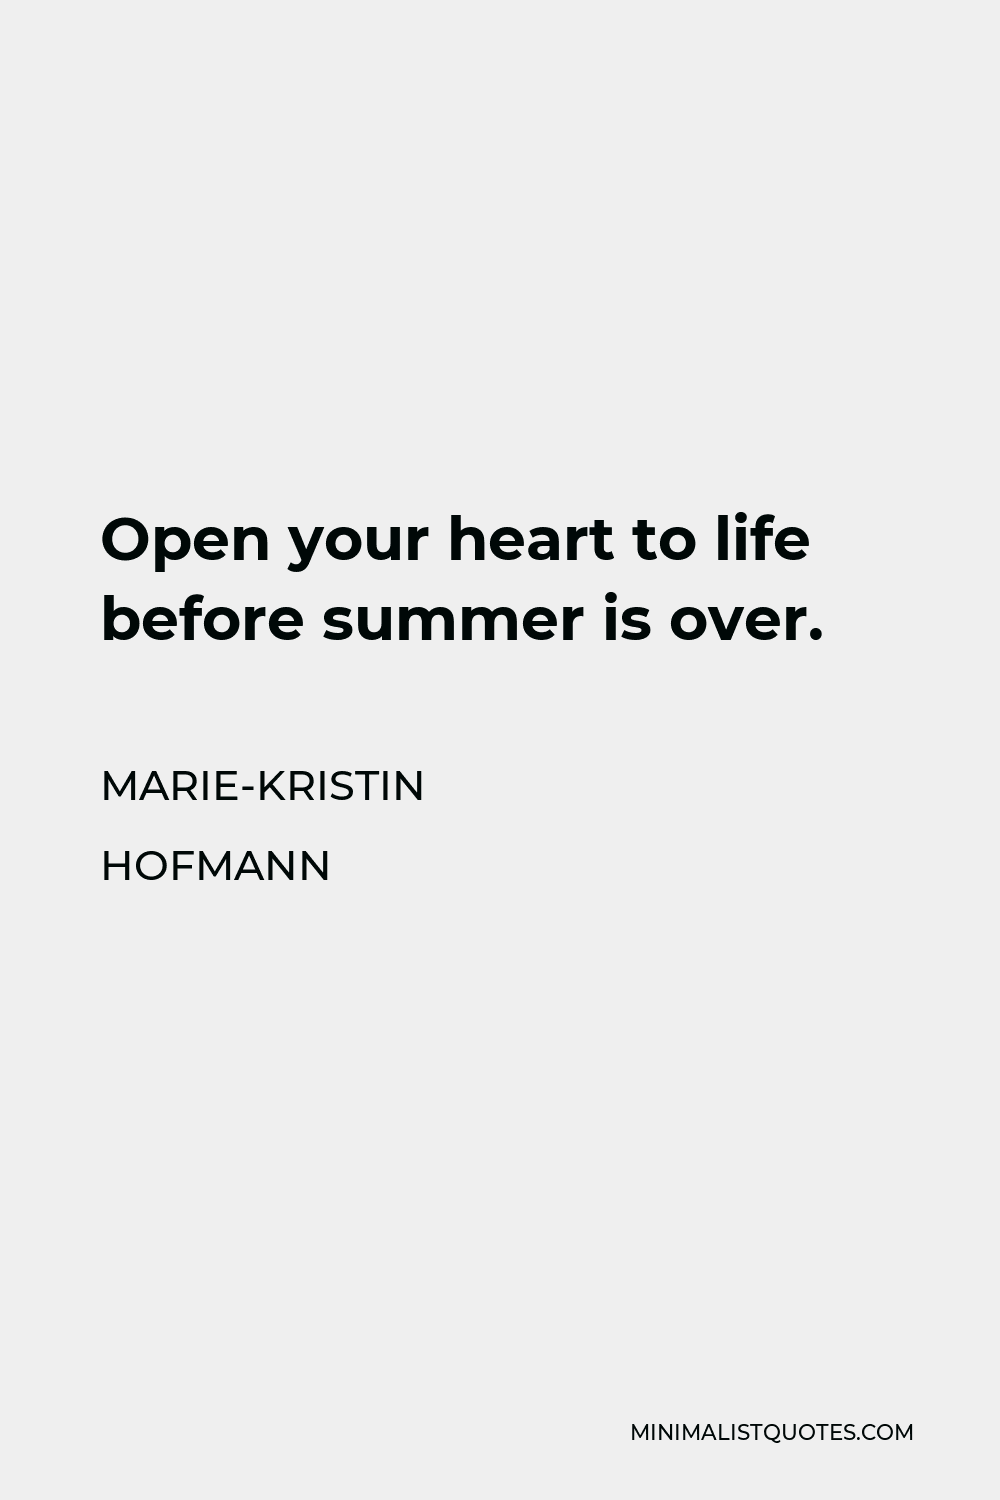 Marie-Kristin Hofmann Quote - Open your heart to life before summer is over.